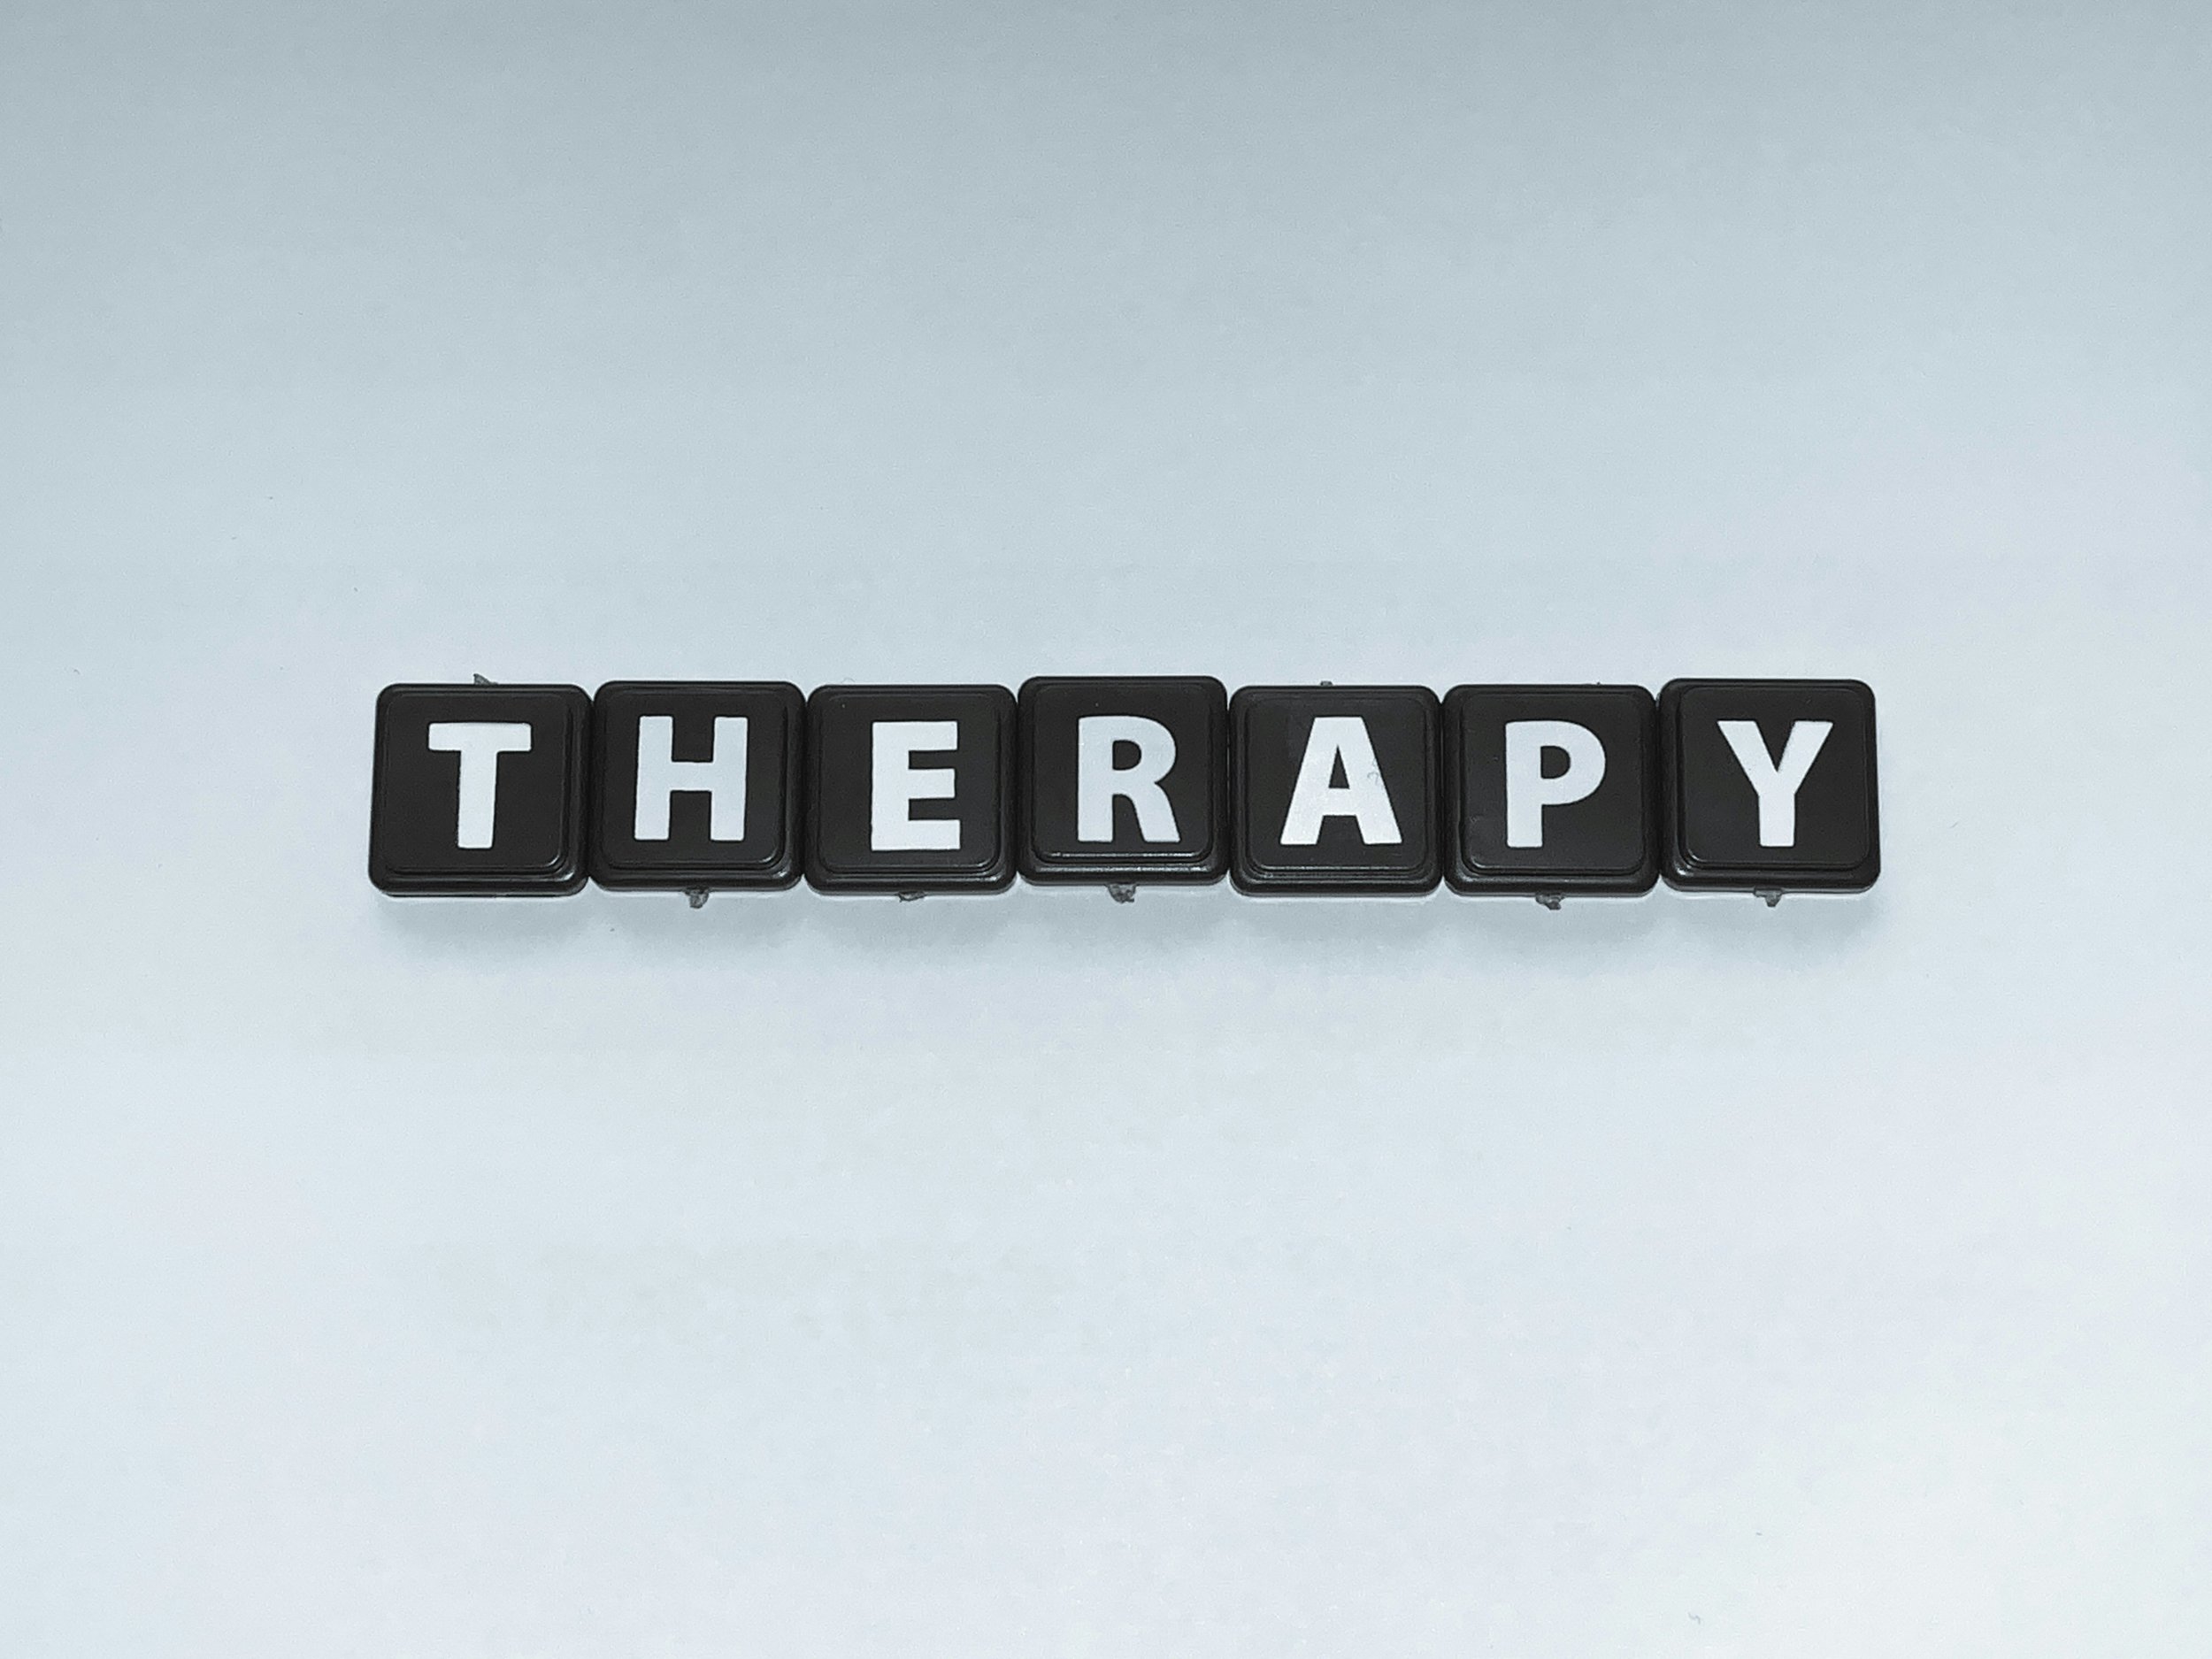 therapy by marcel strauss.jpg